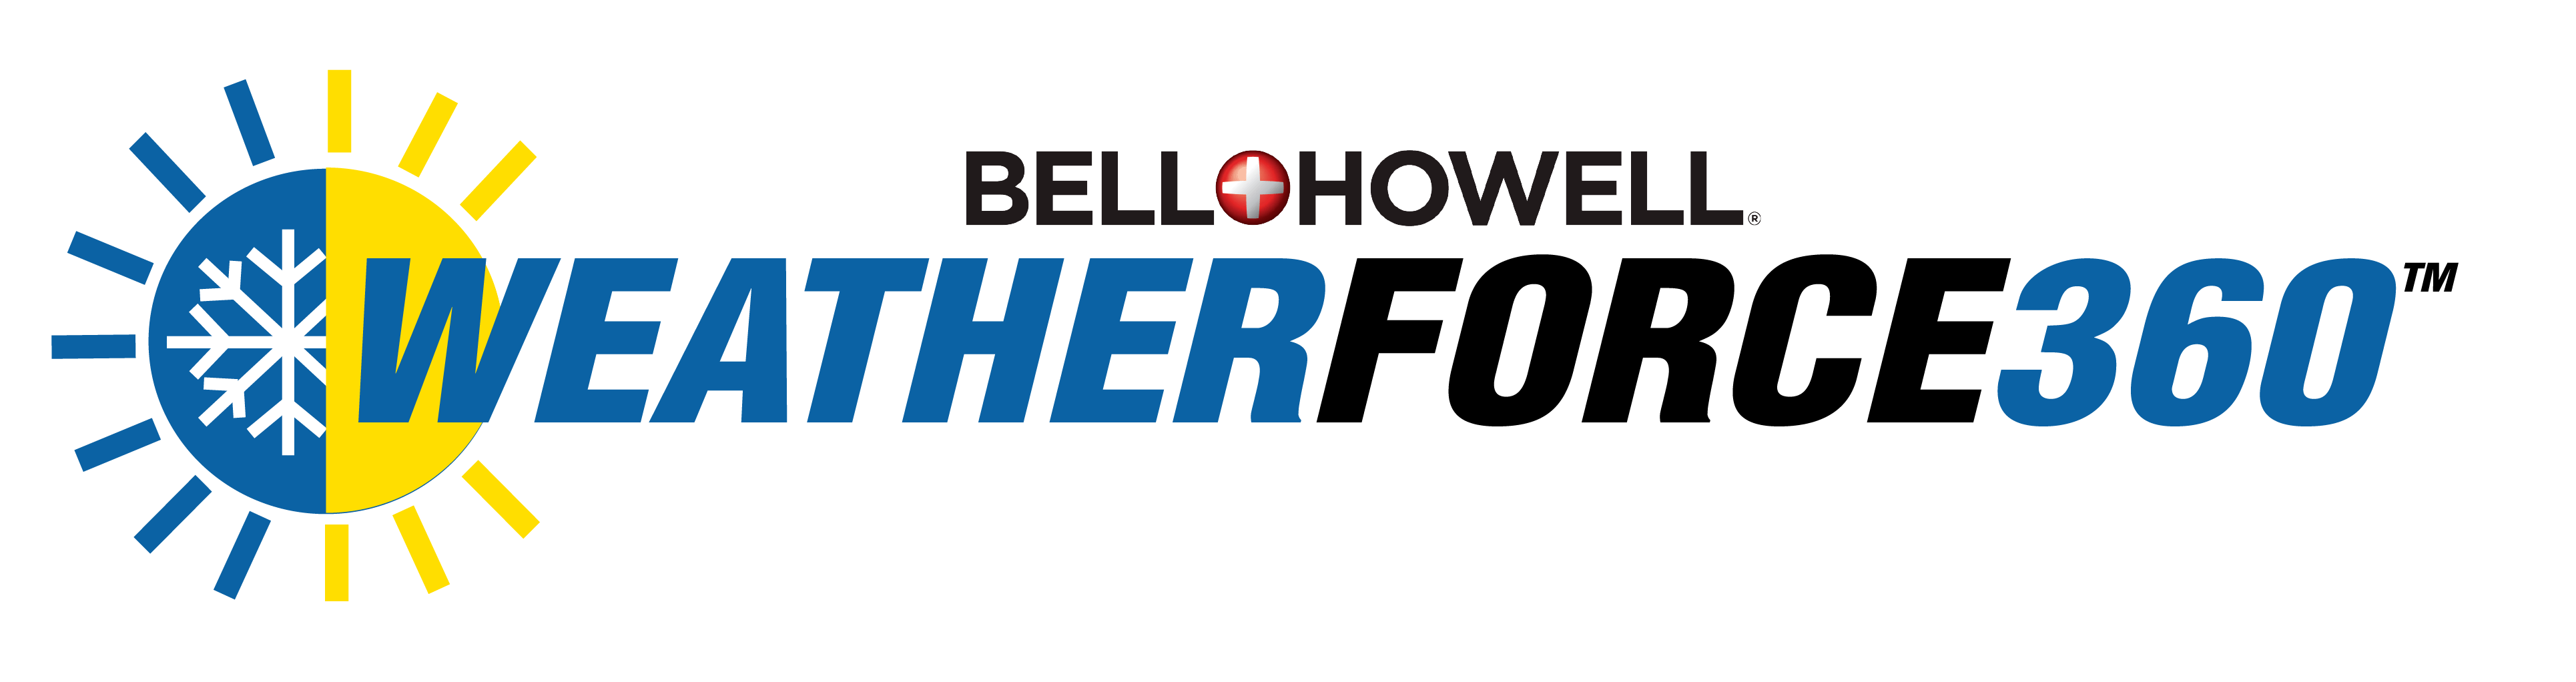 Bell Howell Weather Force 360 Official Site